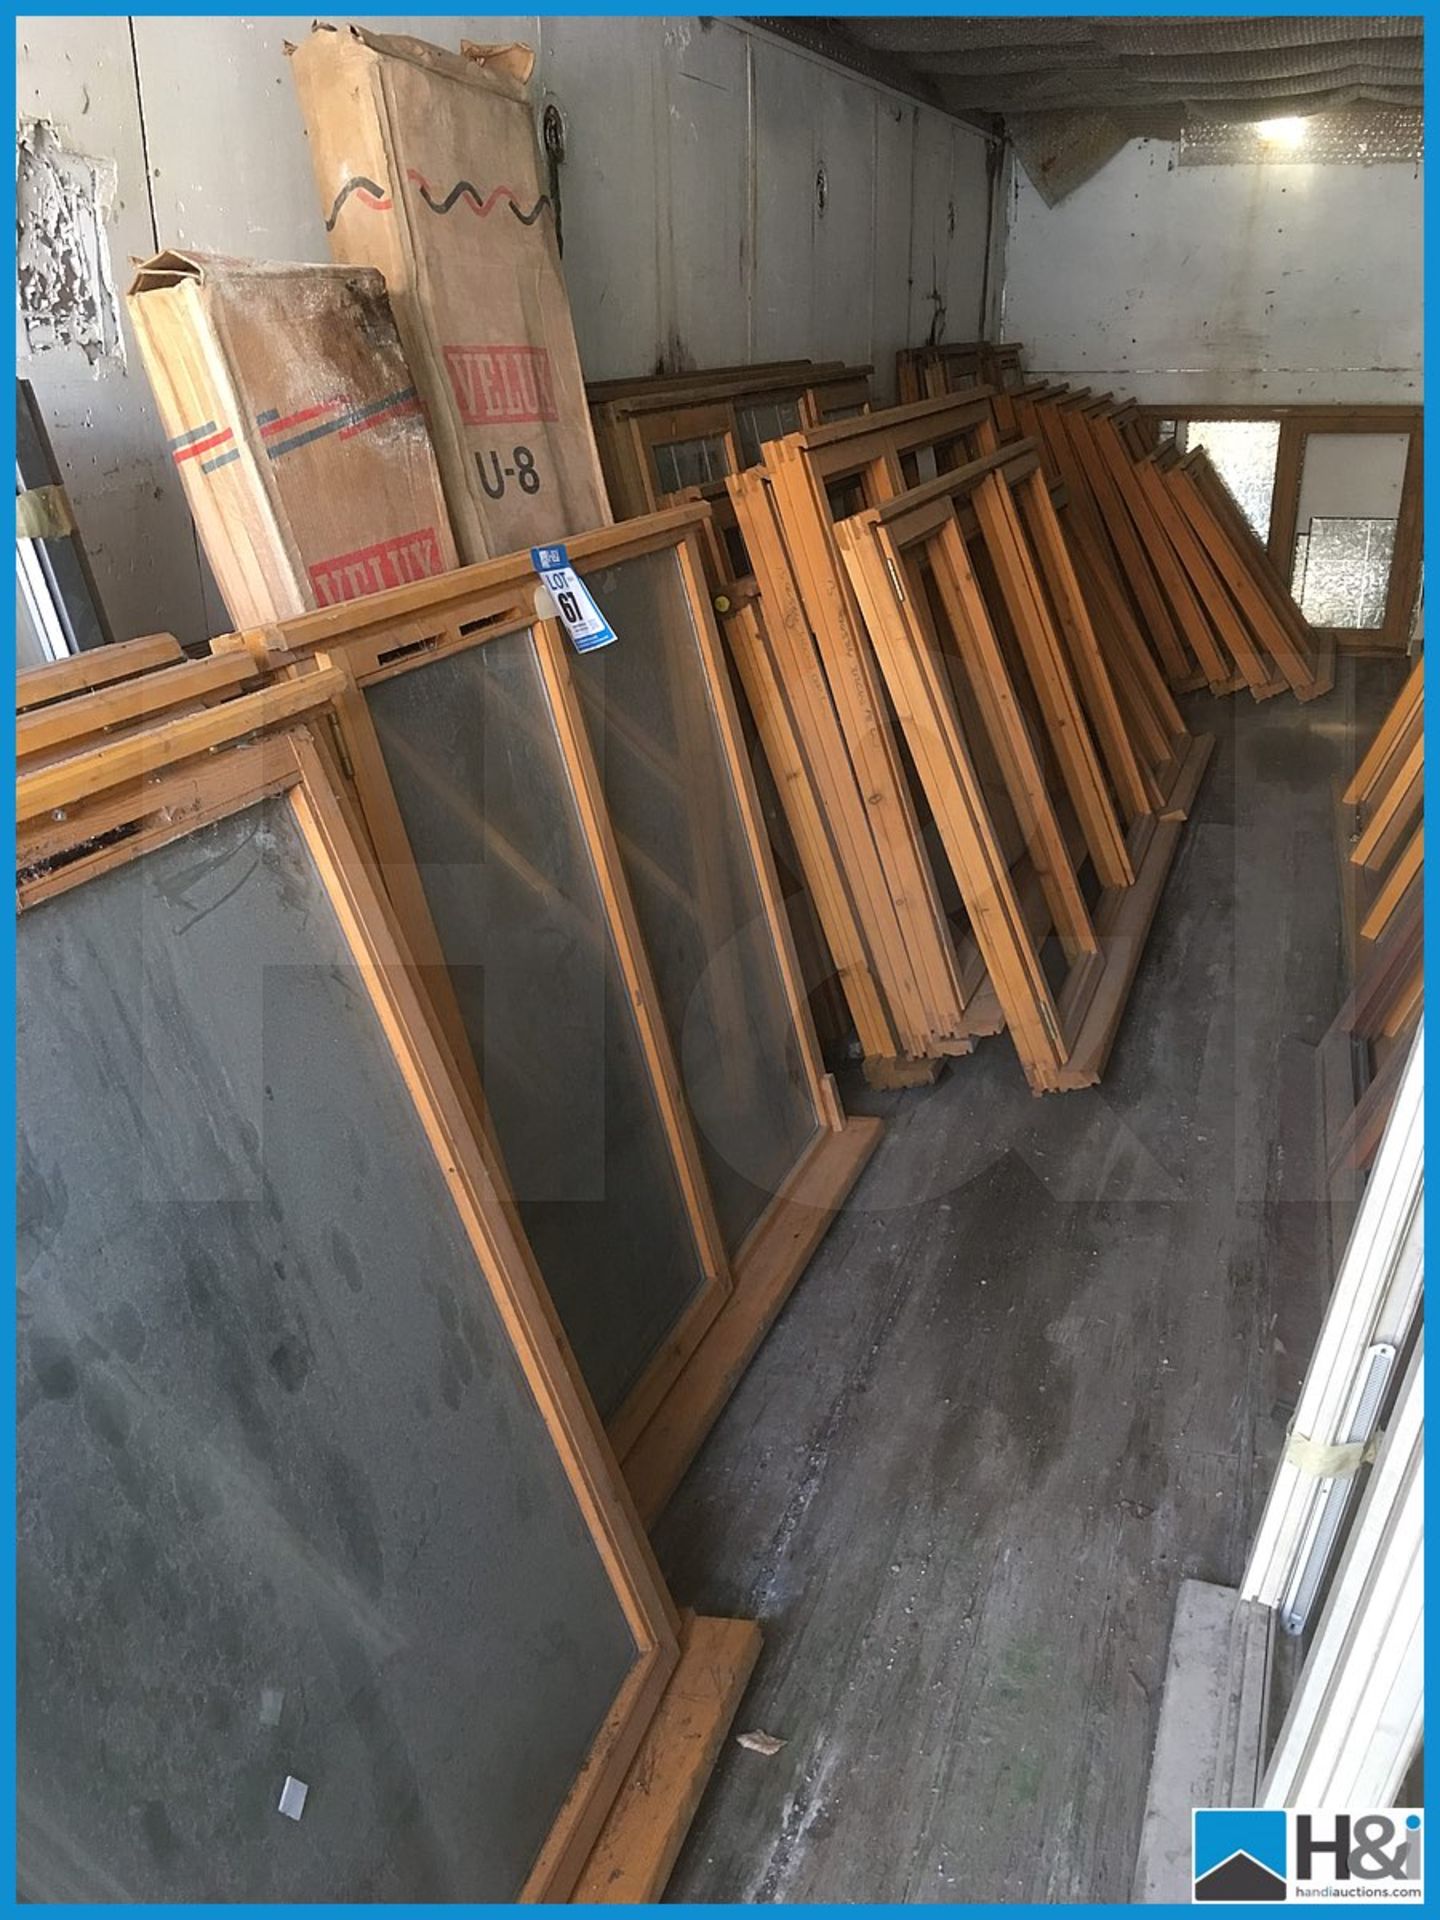 Huge quantity of unused wooden, glazed and unglazed window frames. Dusty appearance due to storage